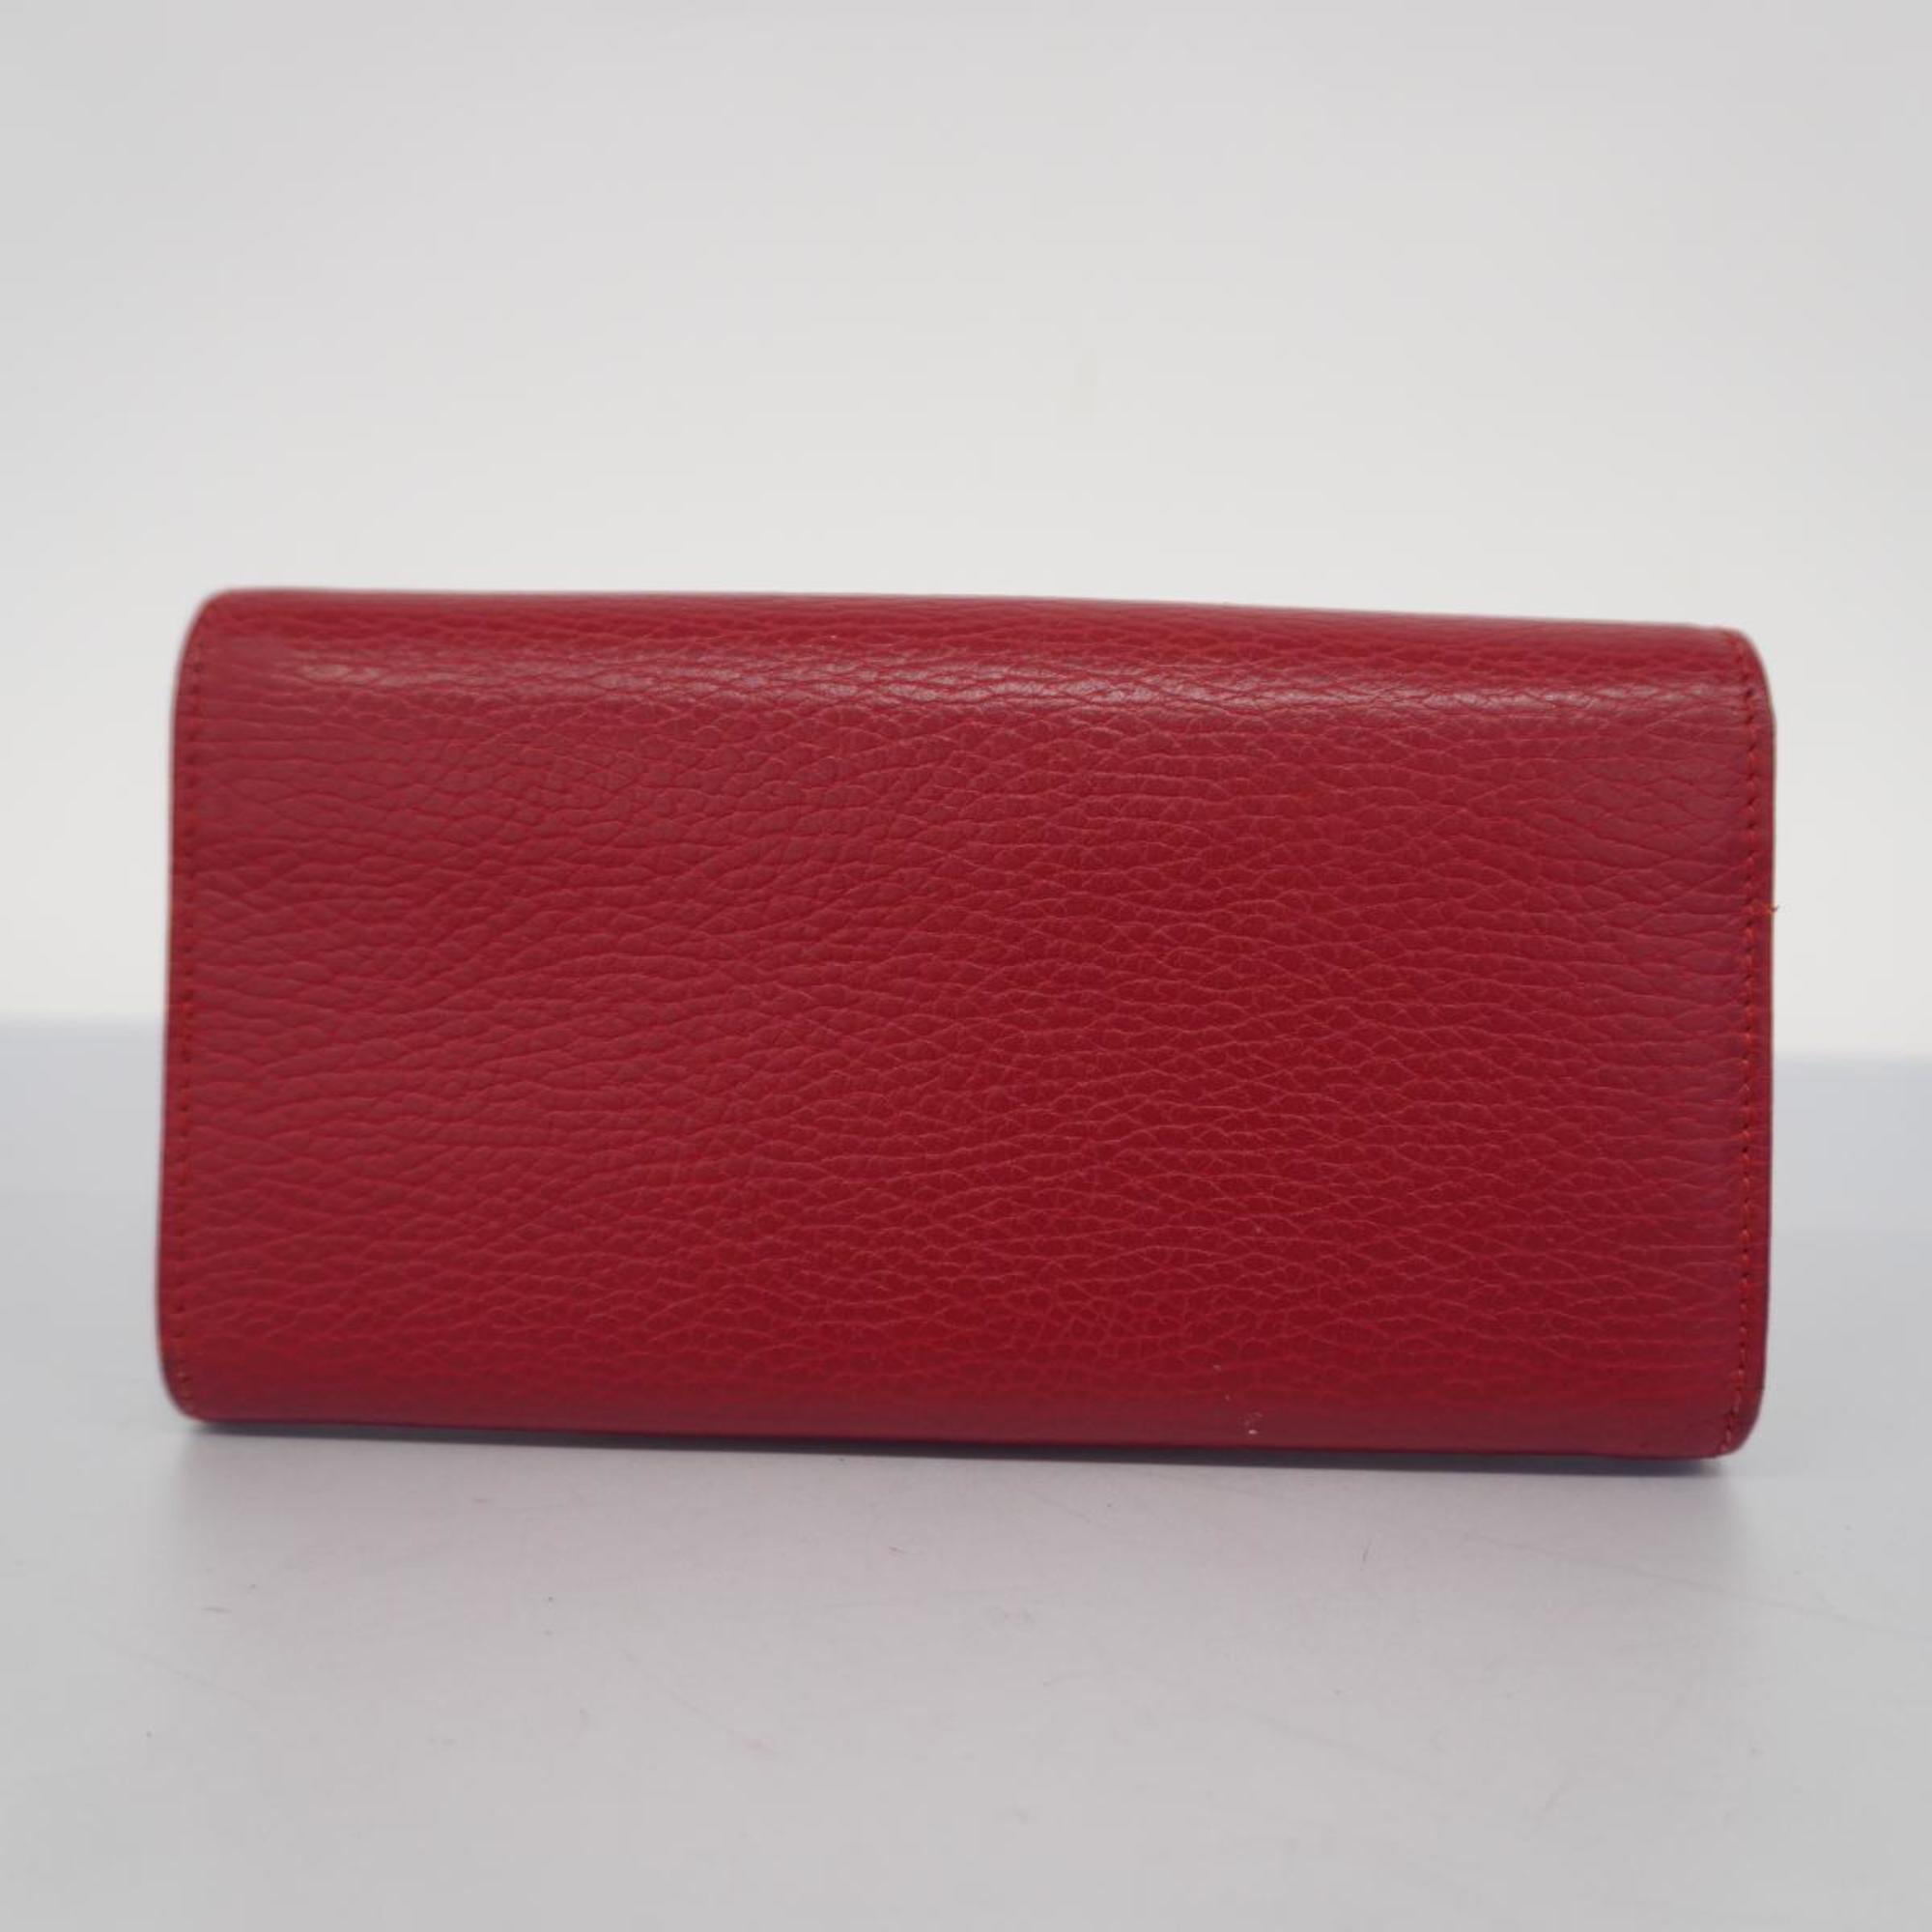 Gucci Long Wallet GG Marmont 456116 Leather Red Women's